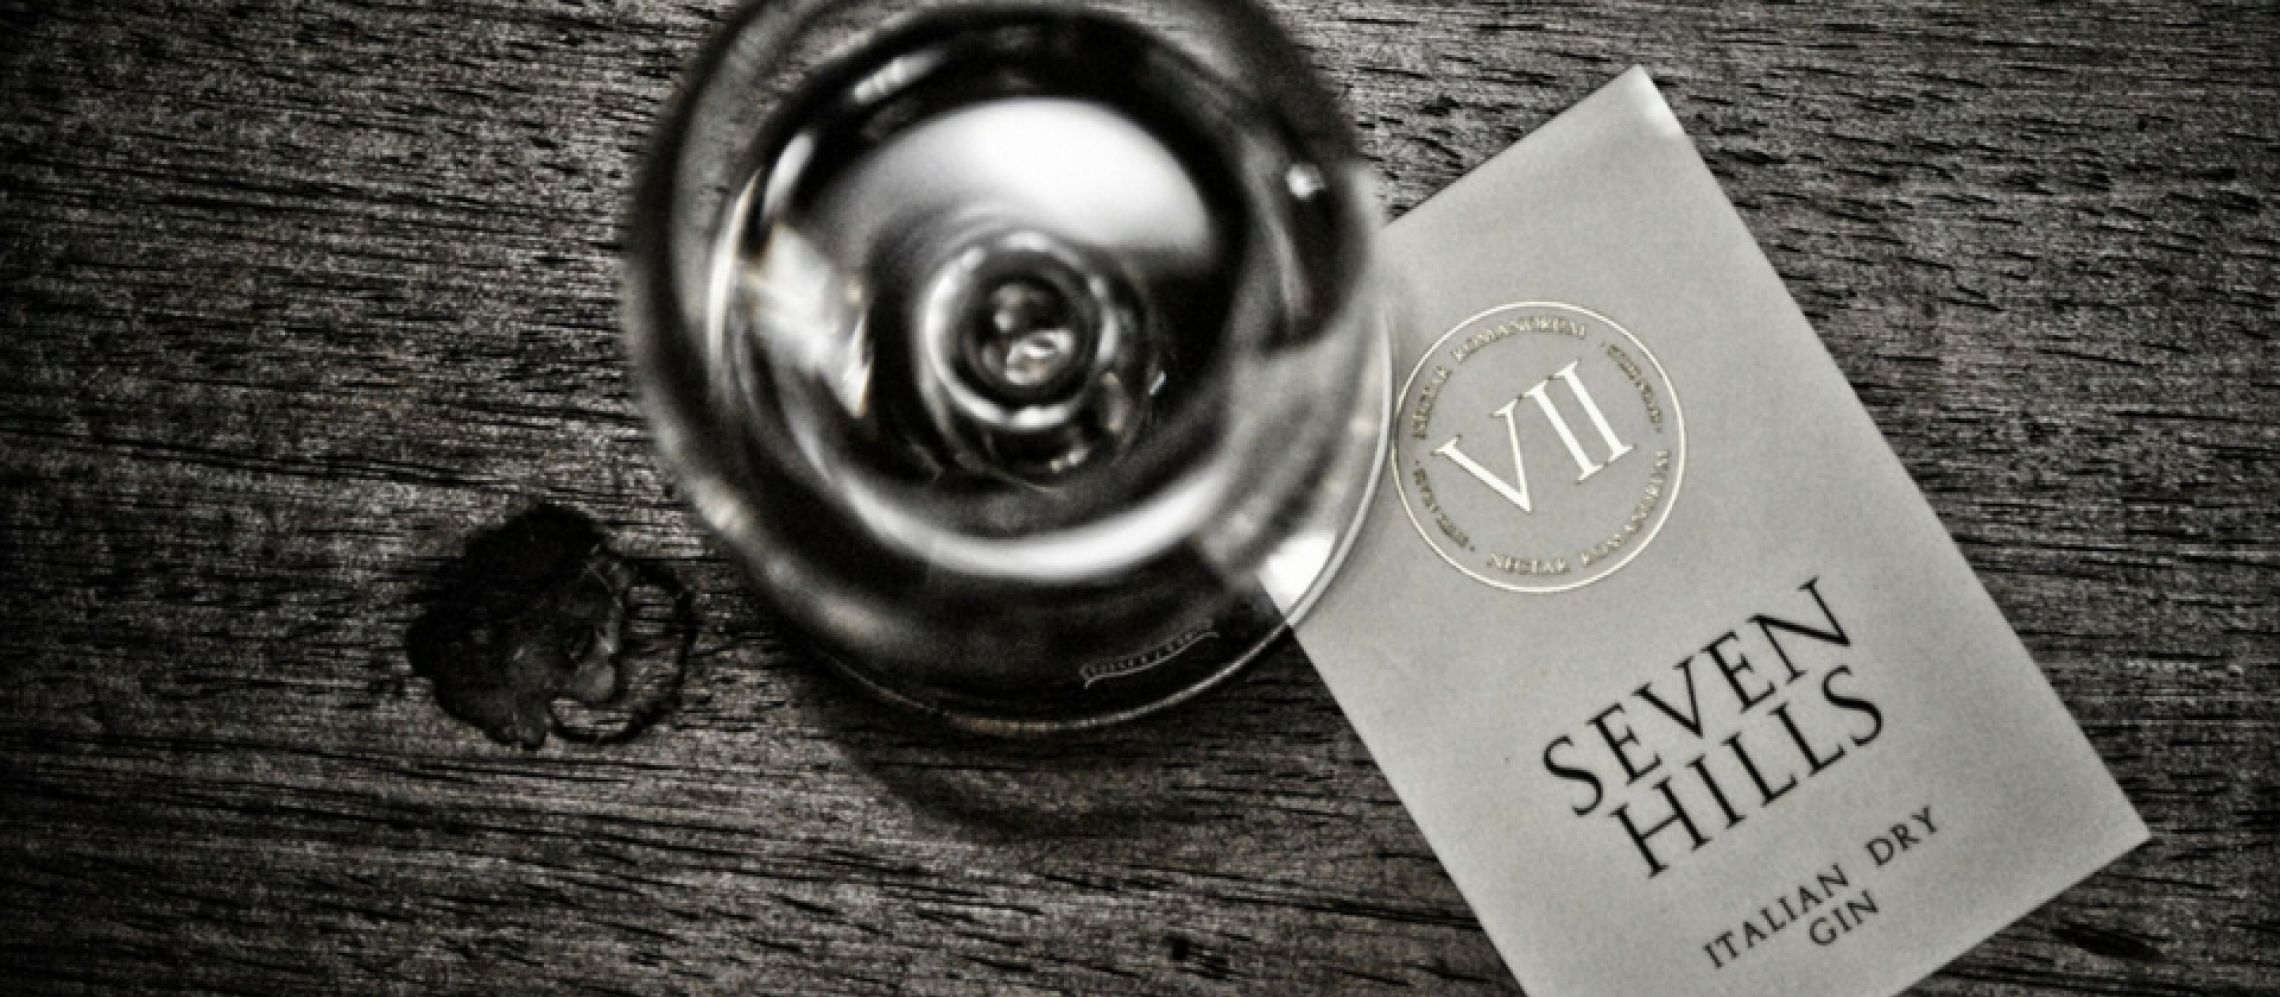 Photo for: VII HILLS GIN- Designed in Italy, Bottled in Turin